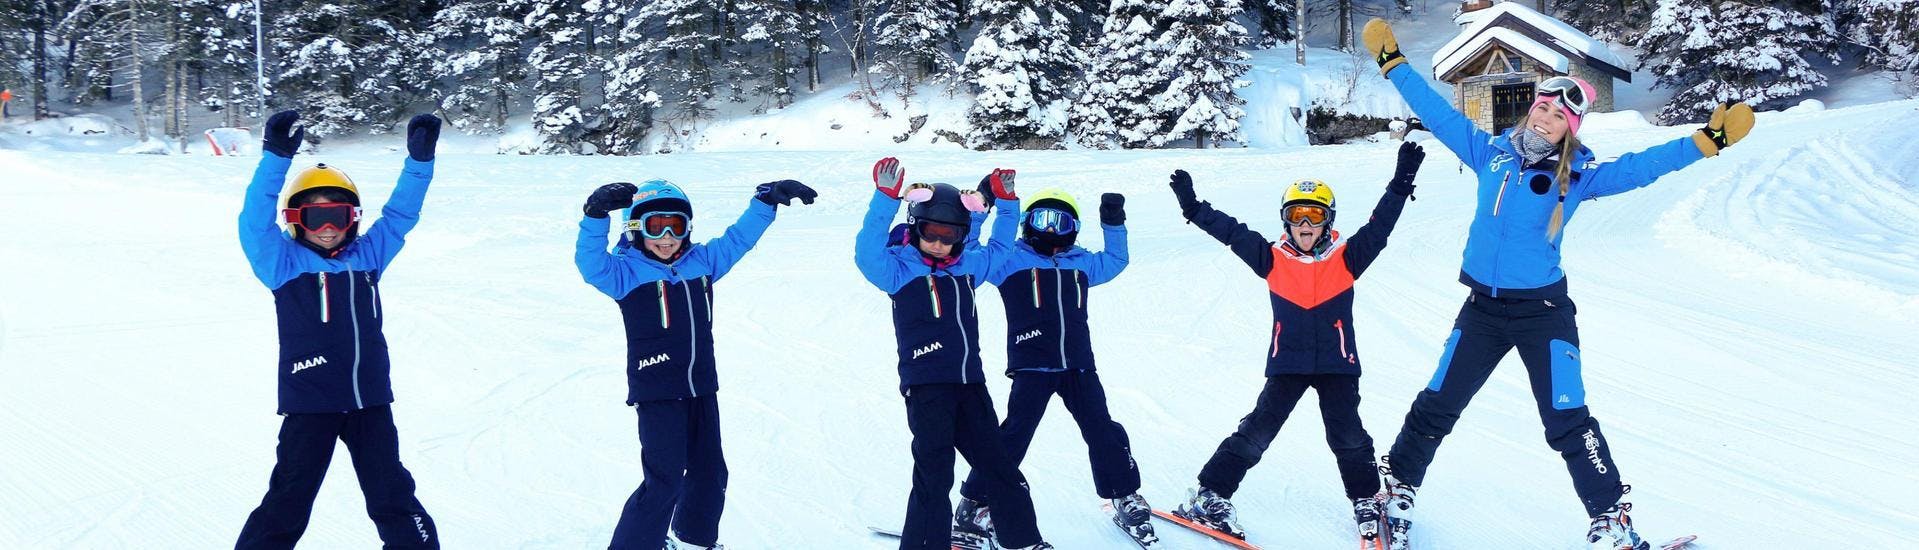 A group of kids is enjoying one of their private ski lessons with their ski instructor from the ski school Scuola di Sci e Snowboard Alpe Cimbra in the ski resort of Folgaria.